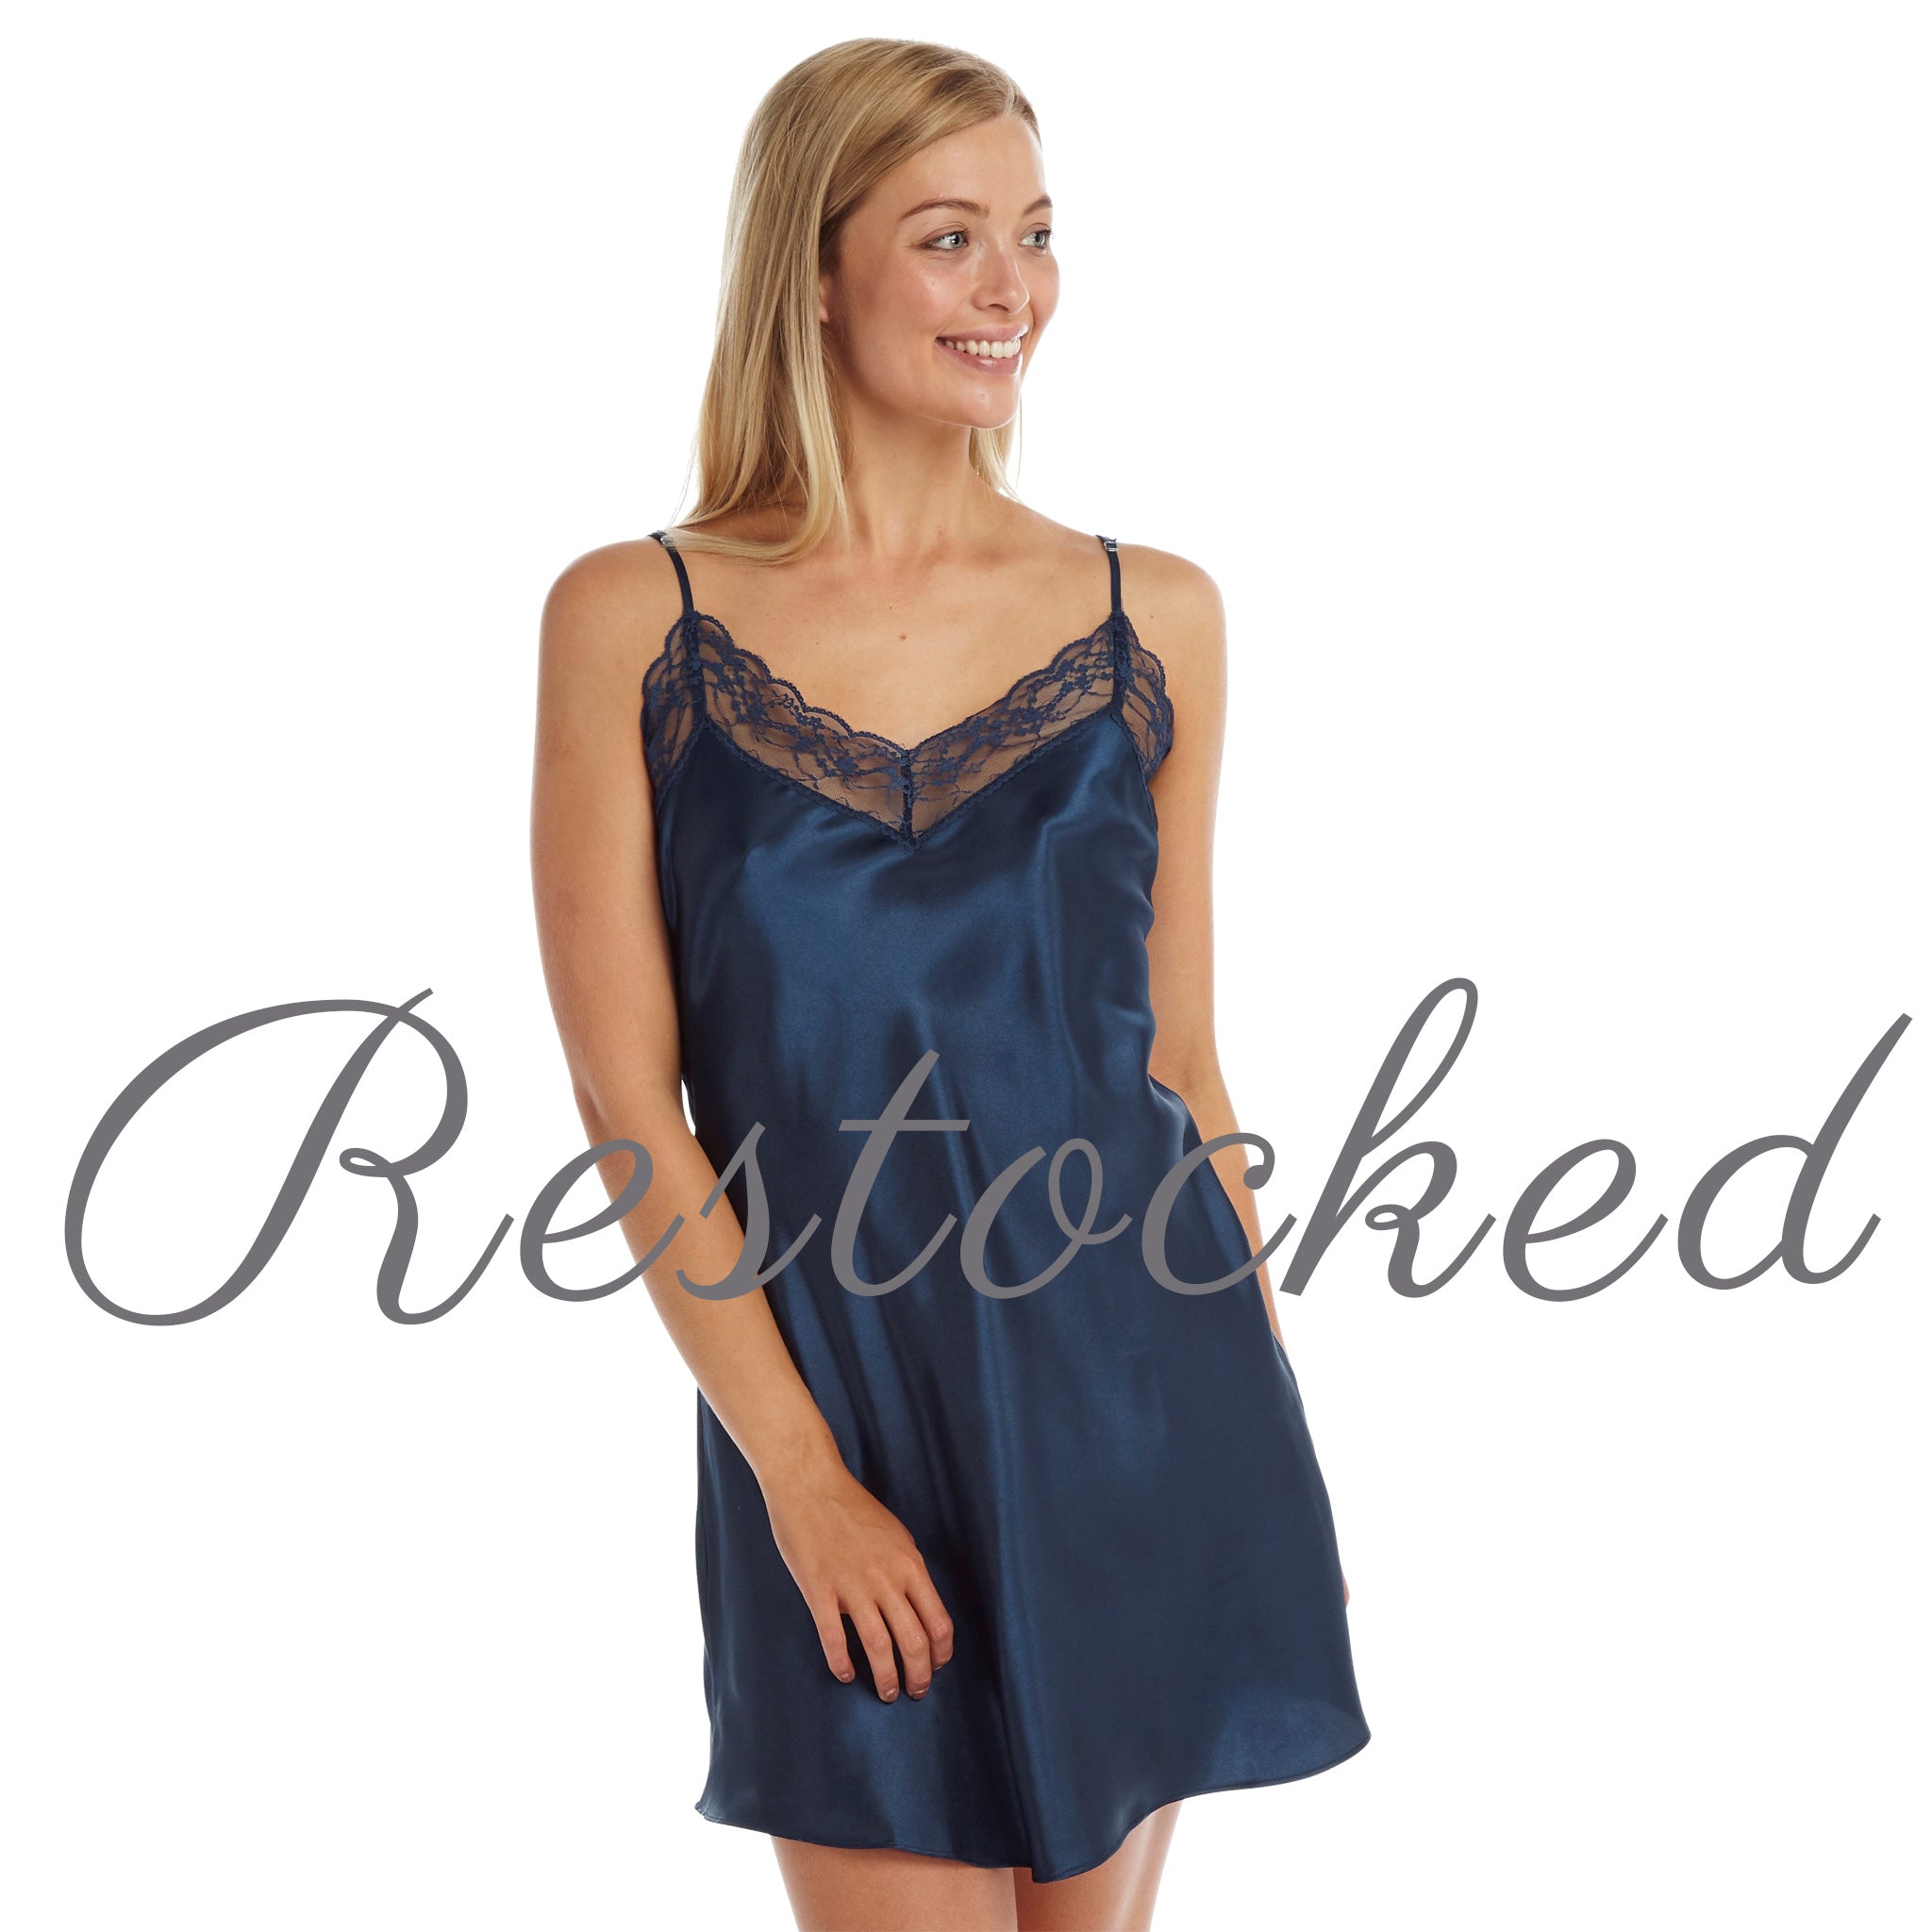 Plain Navy Blue Sexy Satin Lace Chemise Nightie Negligee Lingerie